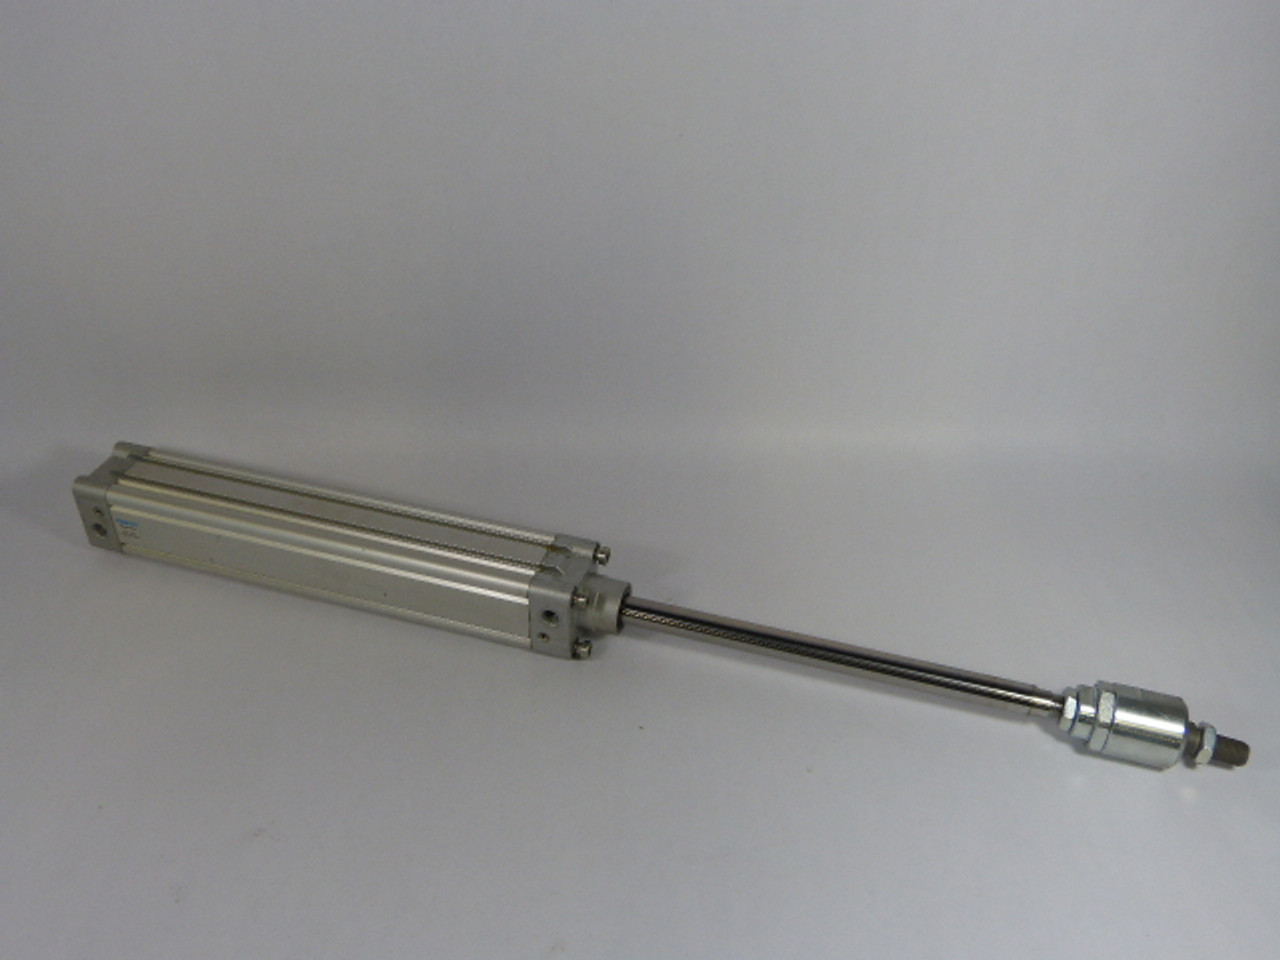 Festo DNC-50-280-PPV-A 163366 Pneumatic Cylinder 50mm Bore 280 Stroke USED